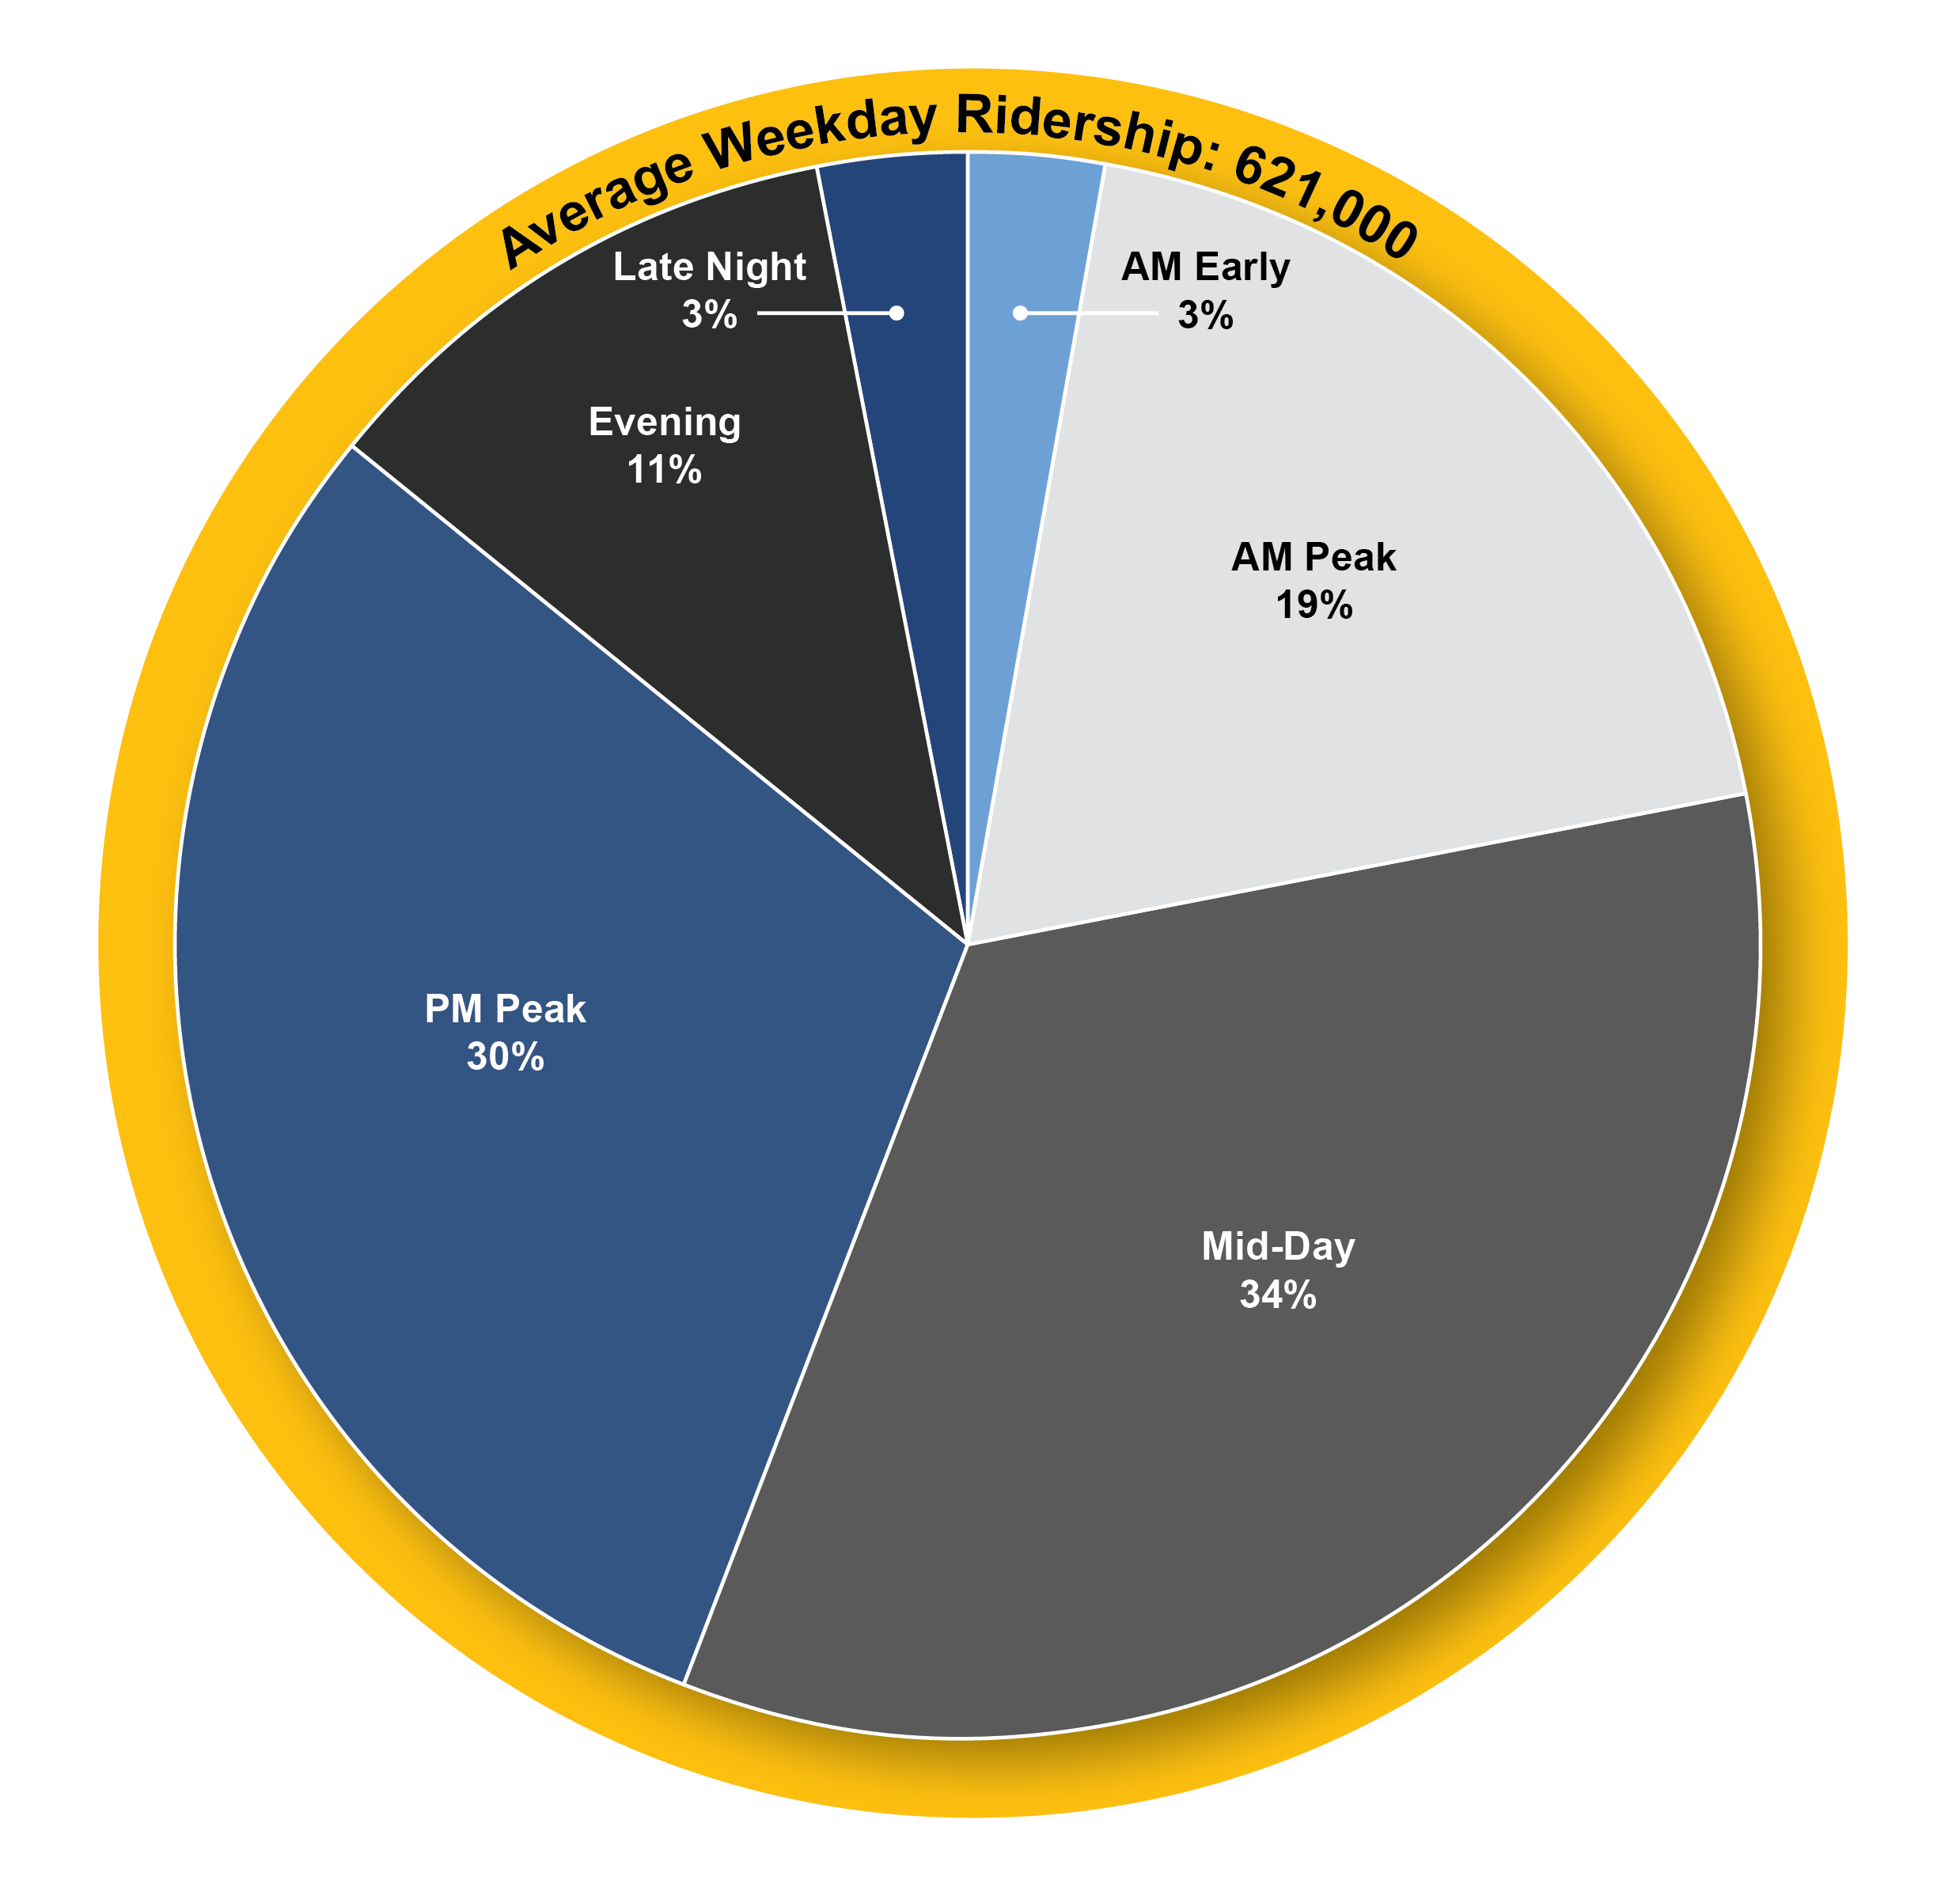 This pie graph shows how the average regional weekday ridership of 621,000 is spread throughout the day. Three percent of bus trips occur during the early morning, nineteen percent during the morning peak, thirty-four percent of rides are during midday, thirty percent occur during the evening peak, eleven percent occur during the evening, and three percent occur during late night hours.